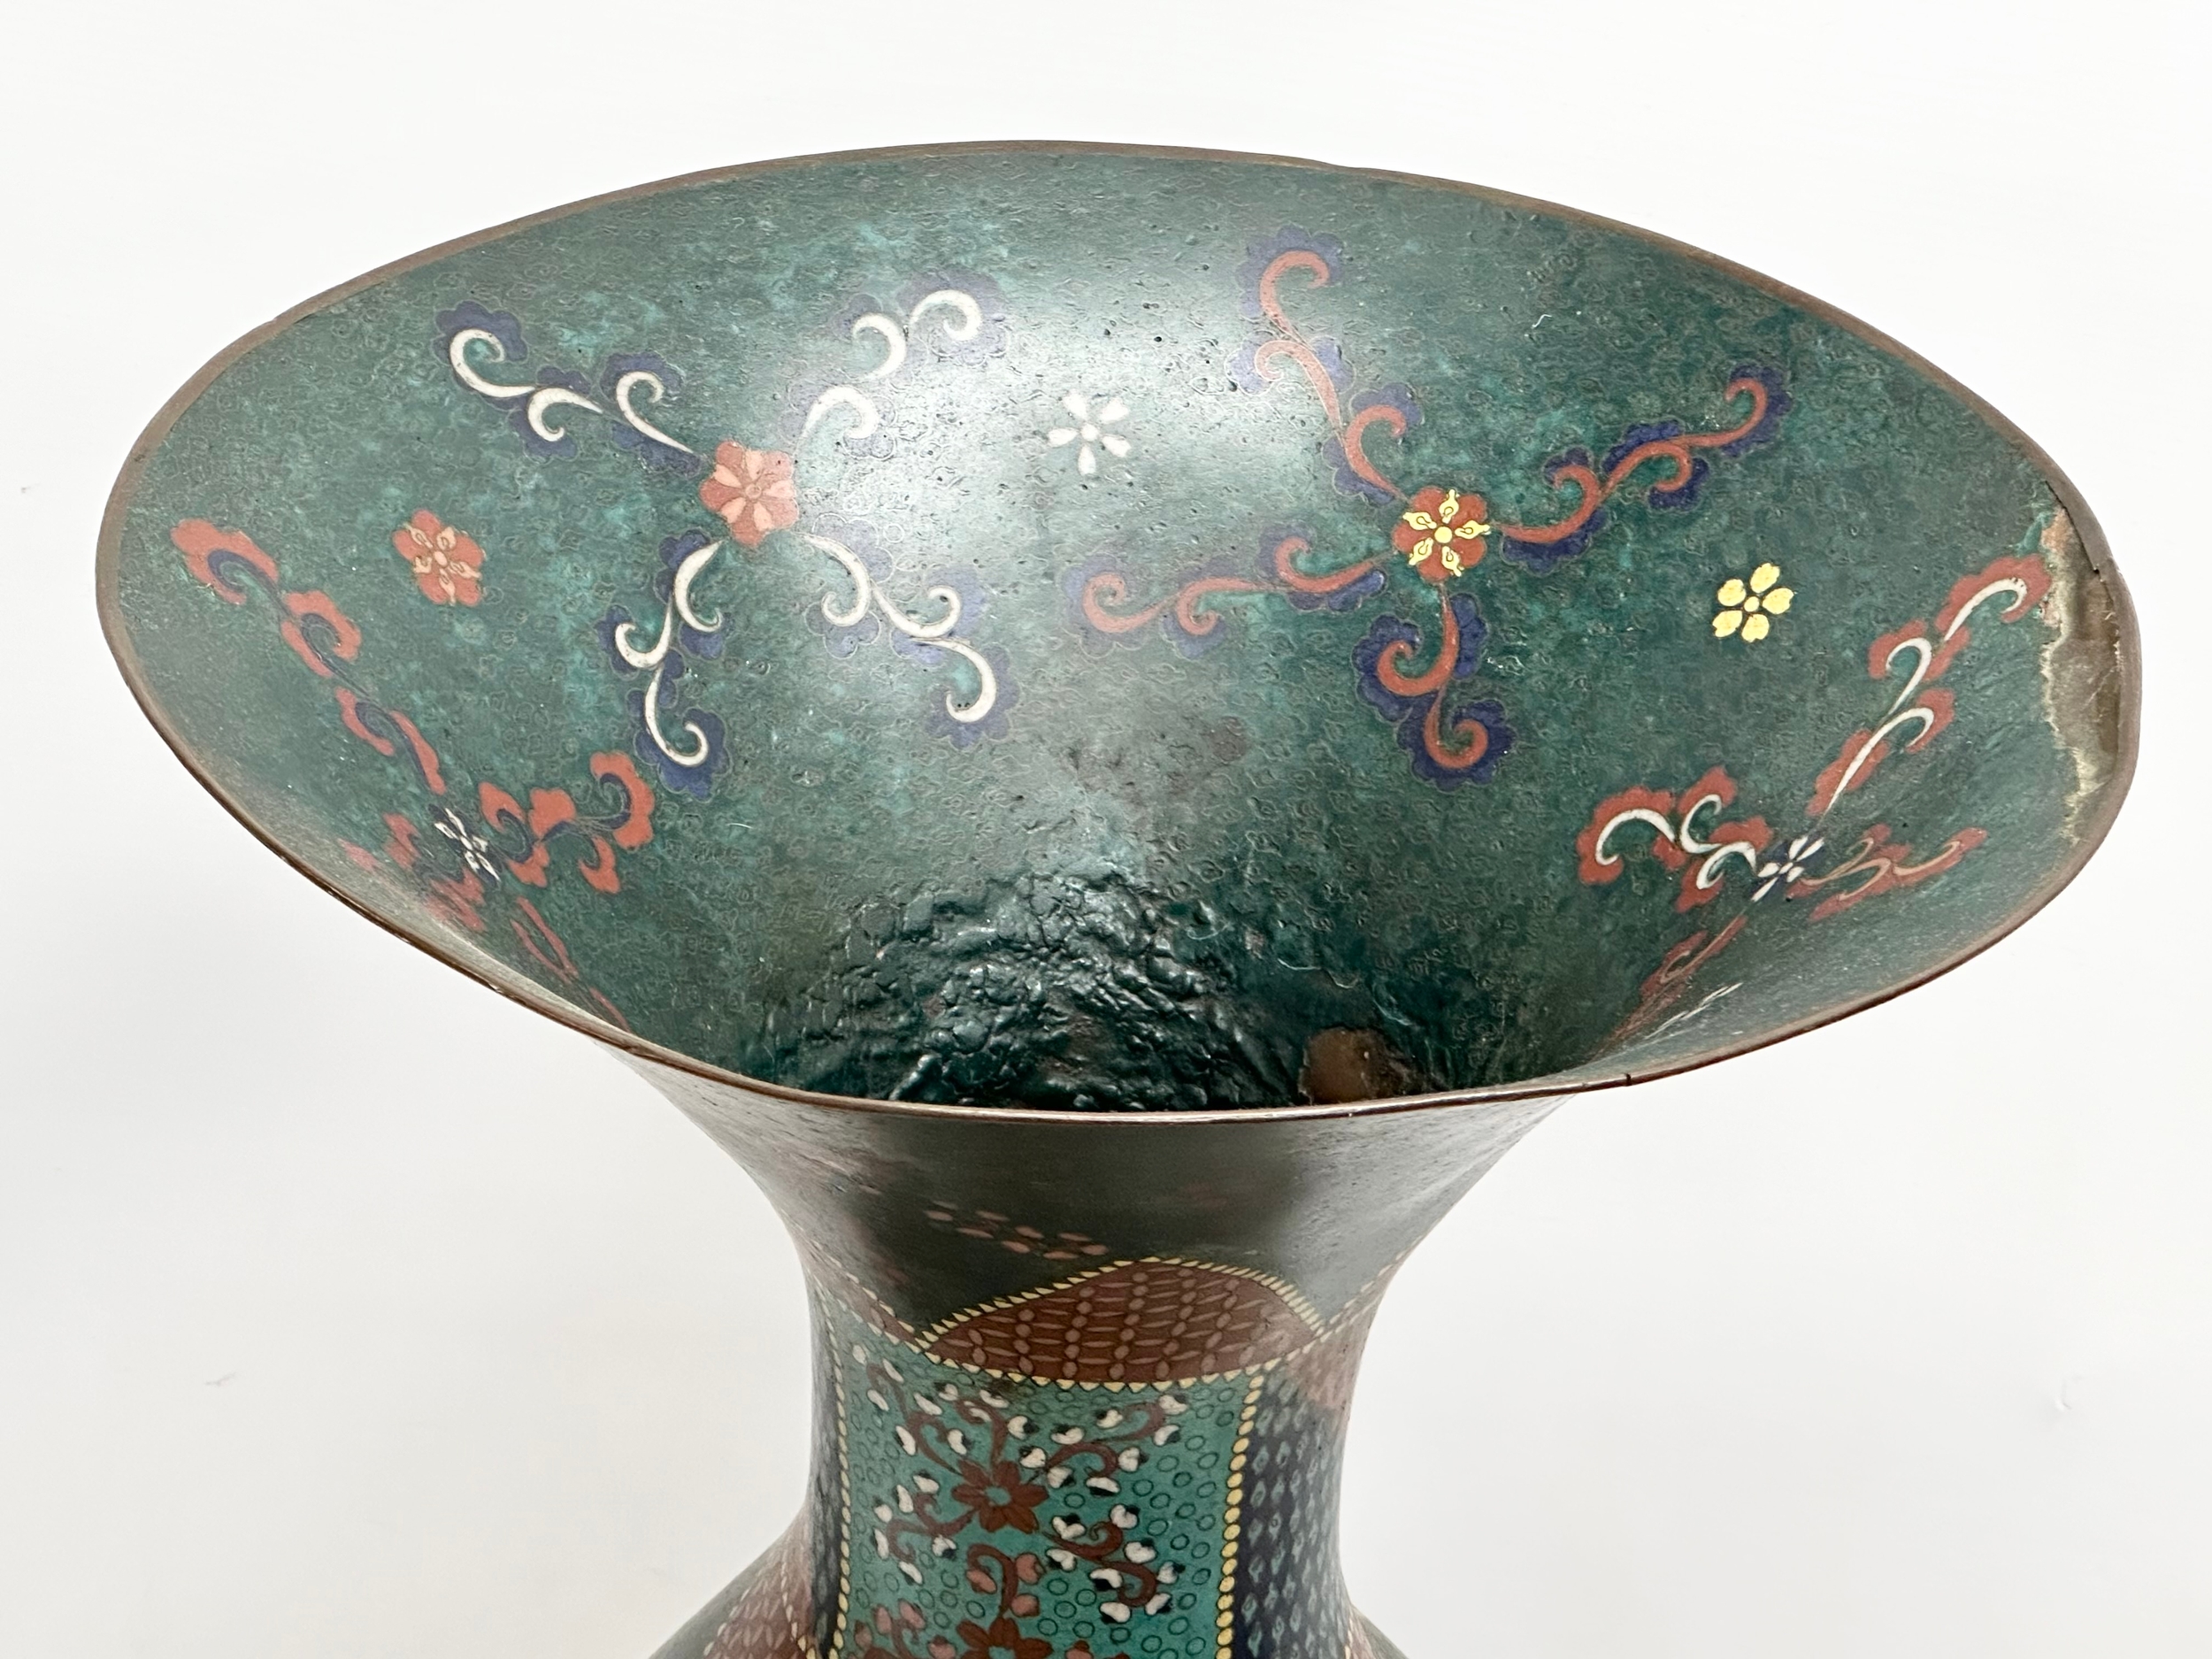 A very large late 19th century Japanese Meiji period cloisonné enamelled pot. Circa 1880-1900. - Image 5 of 7